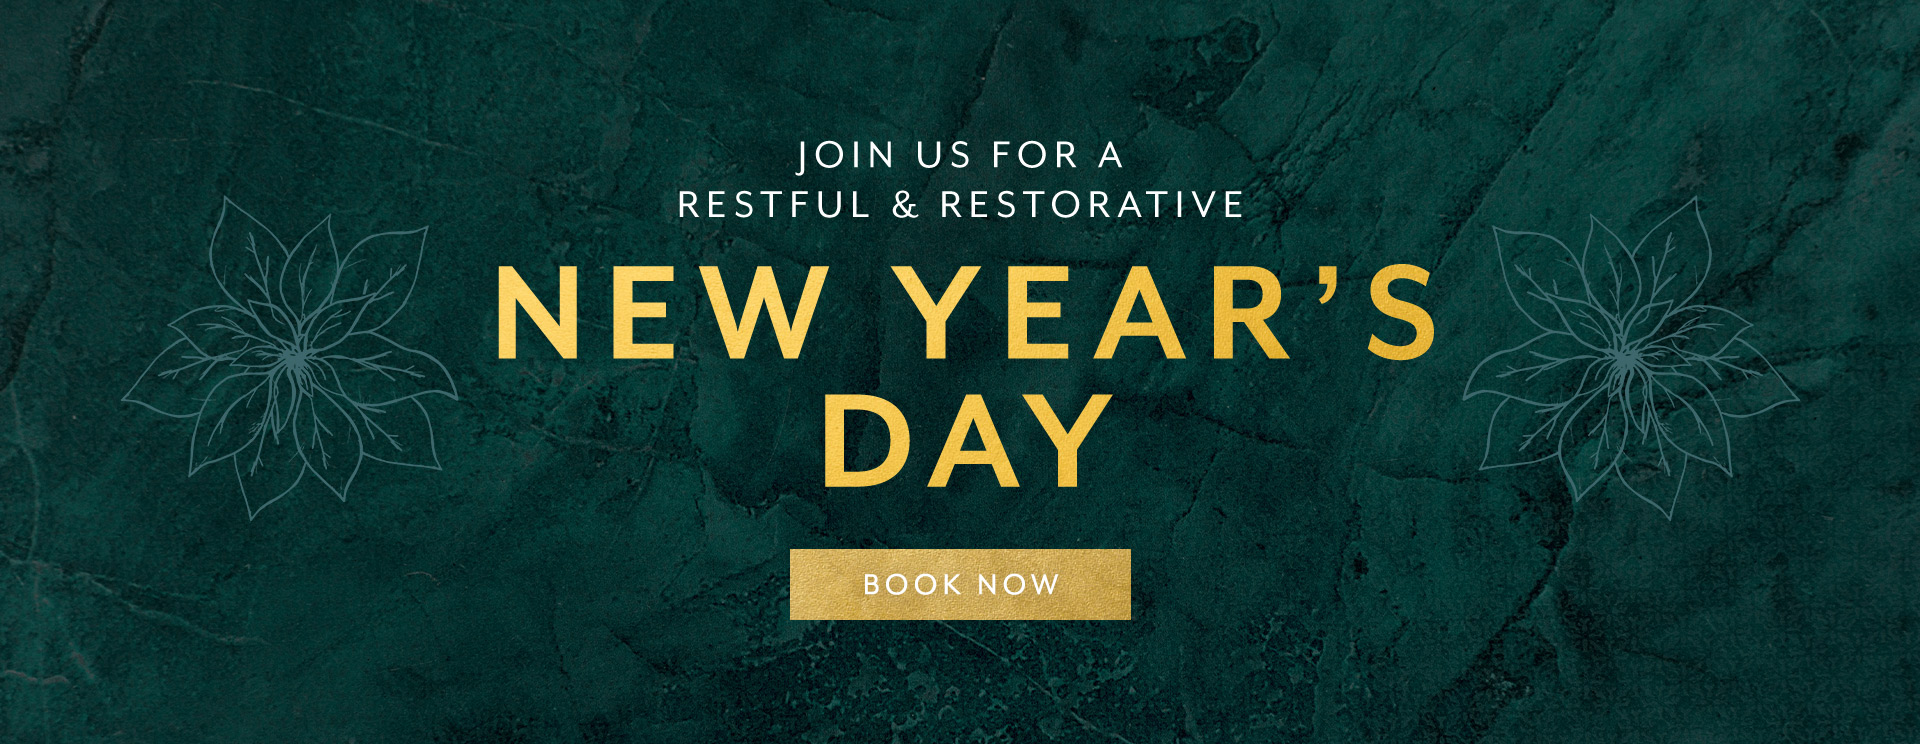 New Year's Day at The Derby Arms